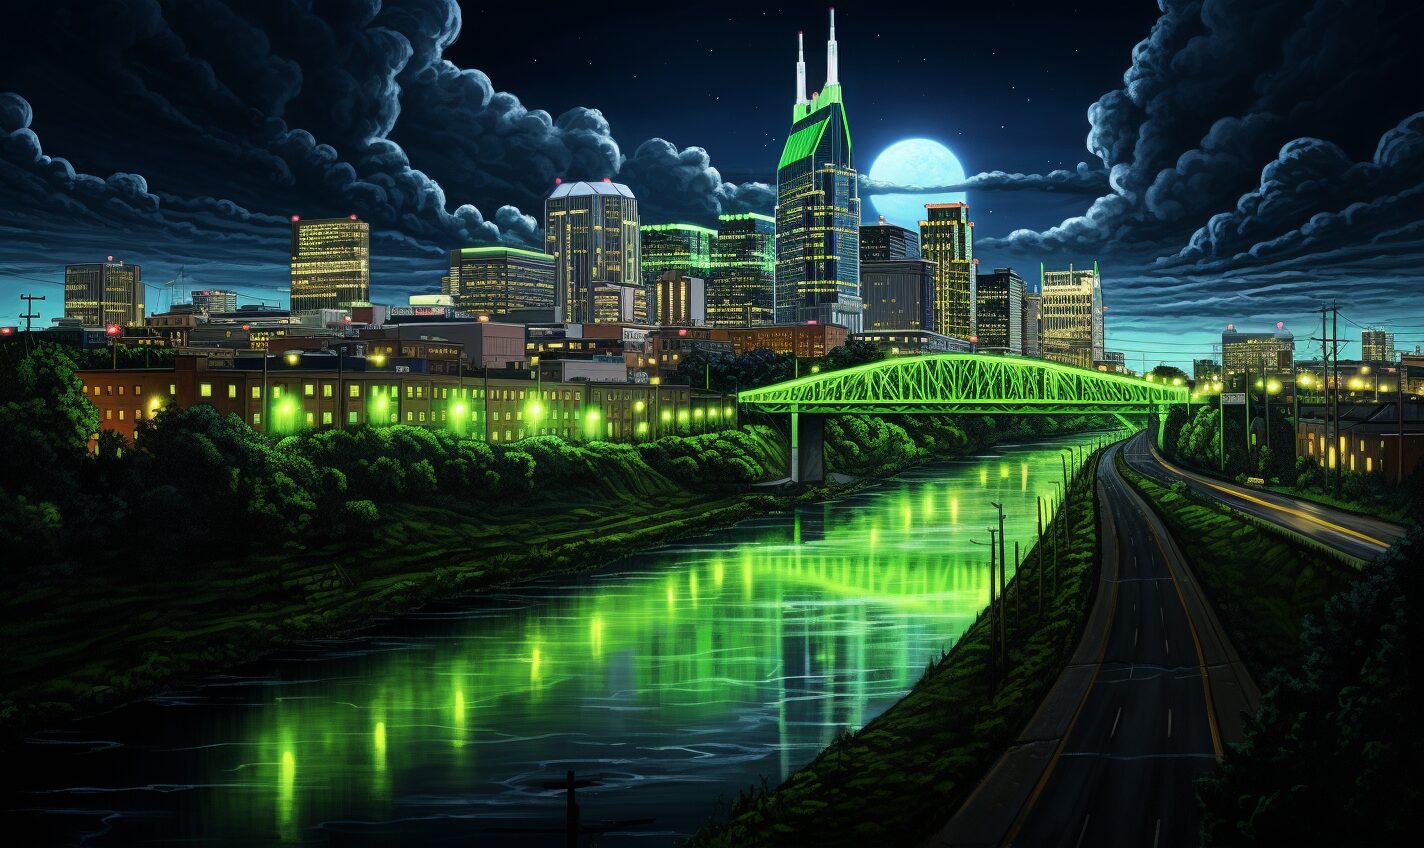 nashville, tennessee in a black and neon green glow